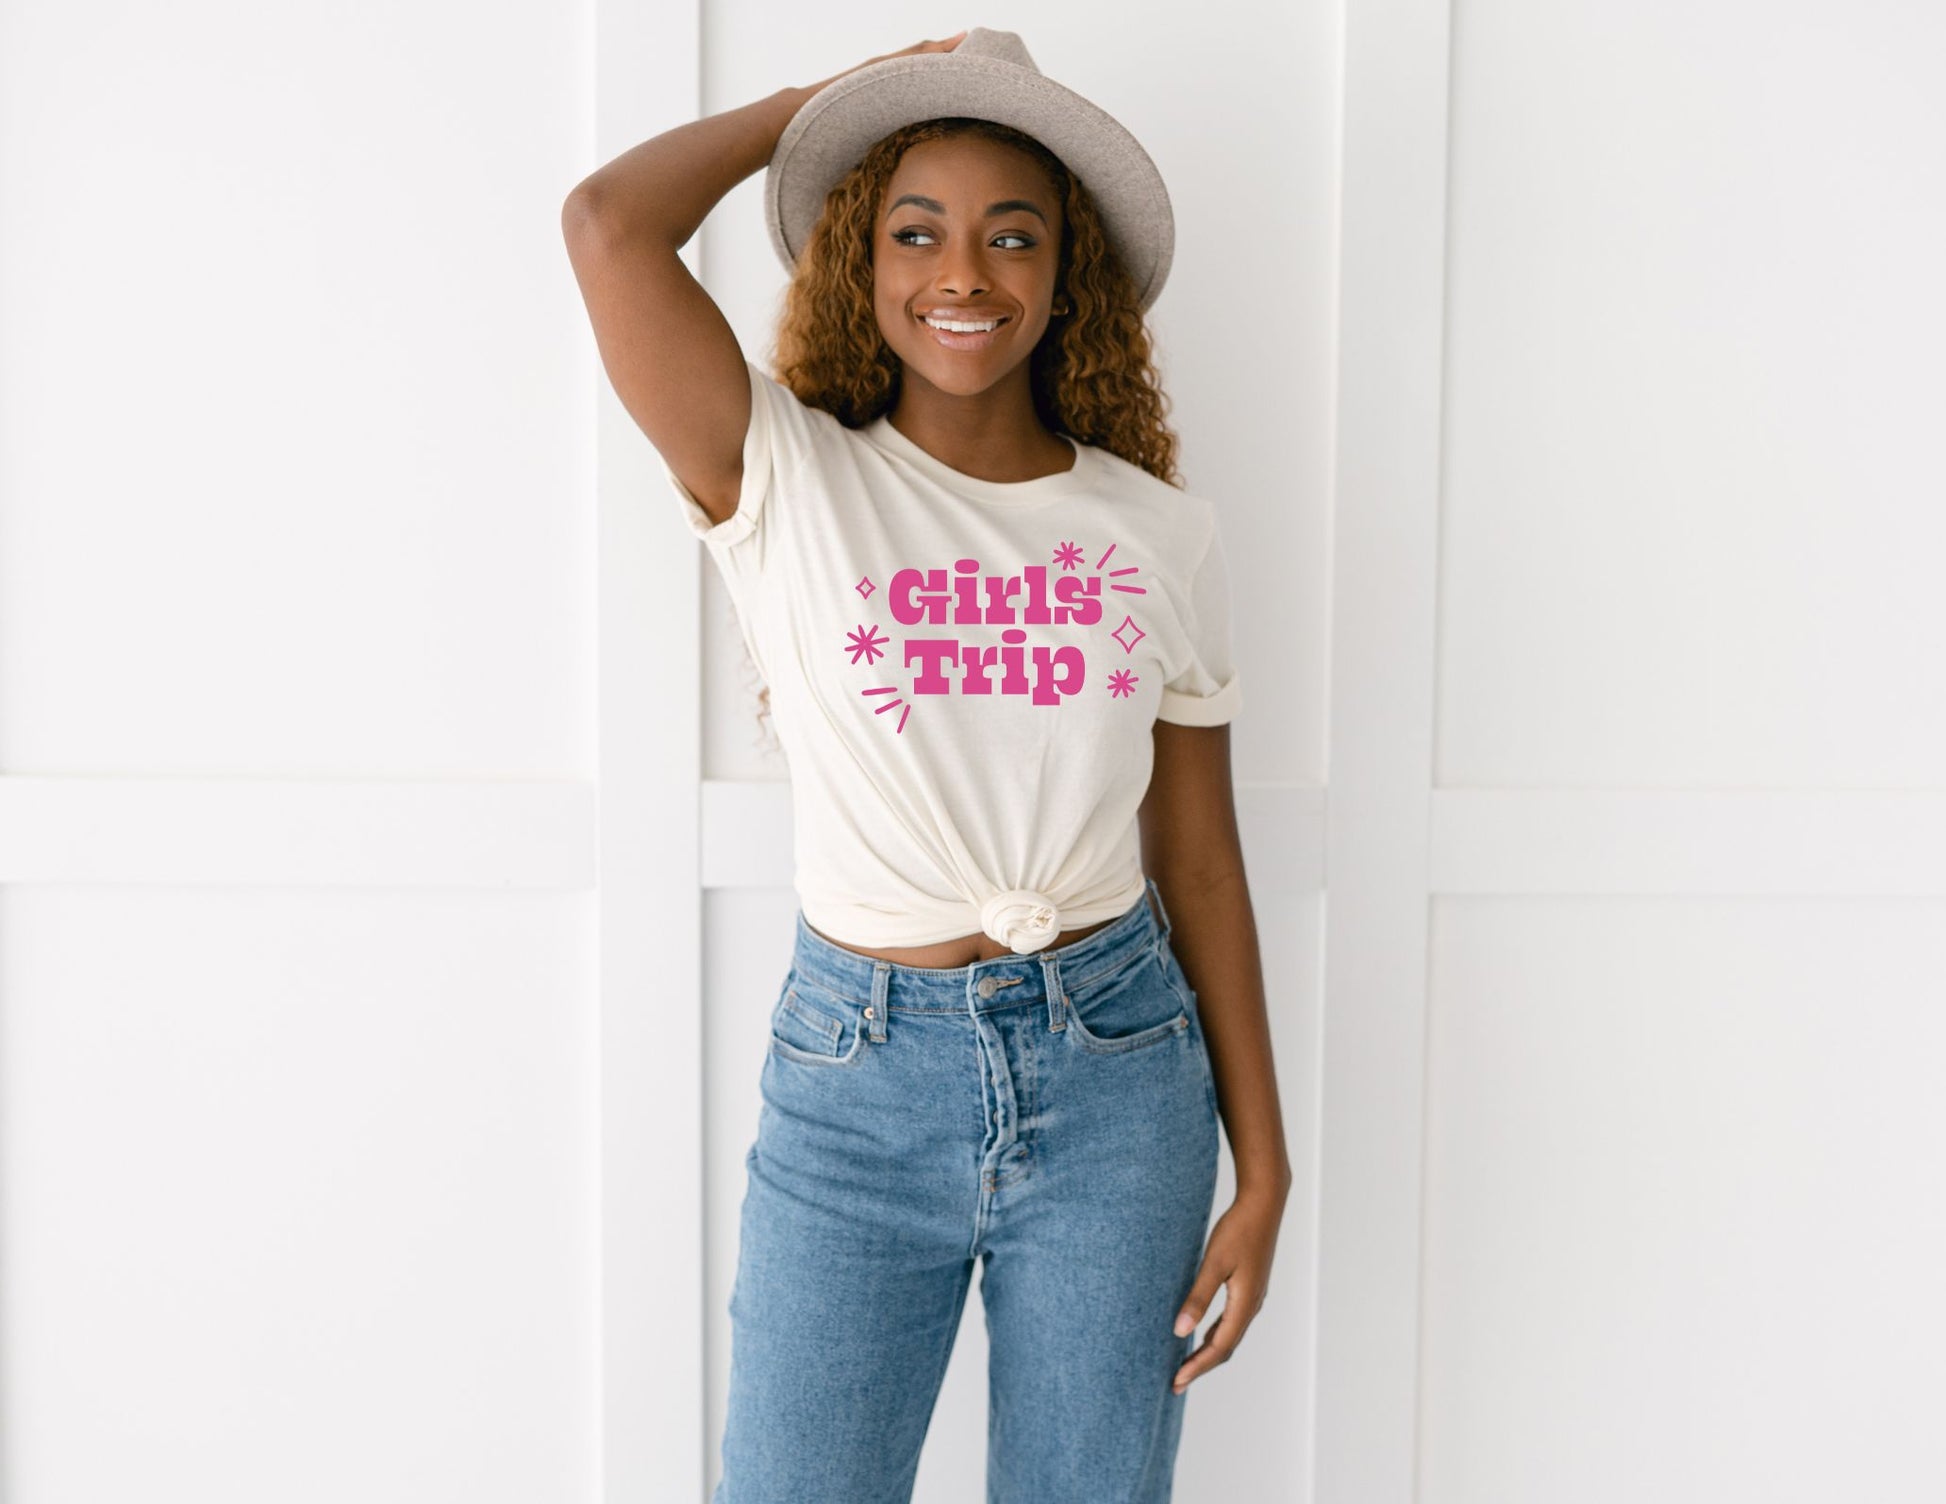 Sunshine Girls Trip Shirt for vacations with your best friends